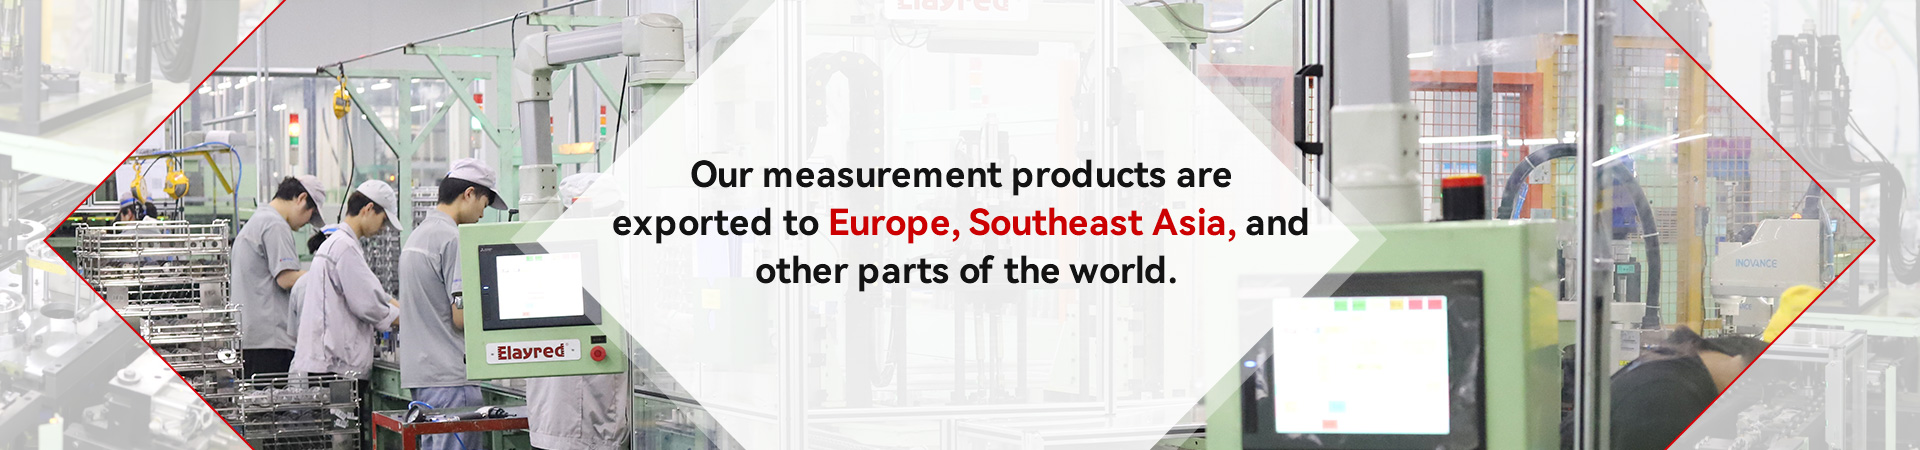 Our measurement products are exported to Europe, Southeast Asia, and other parts of the world.